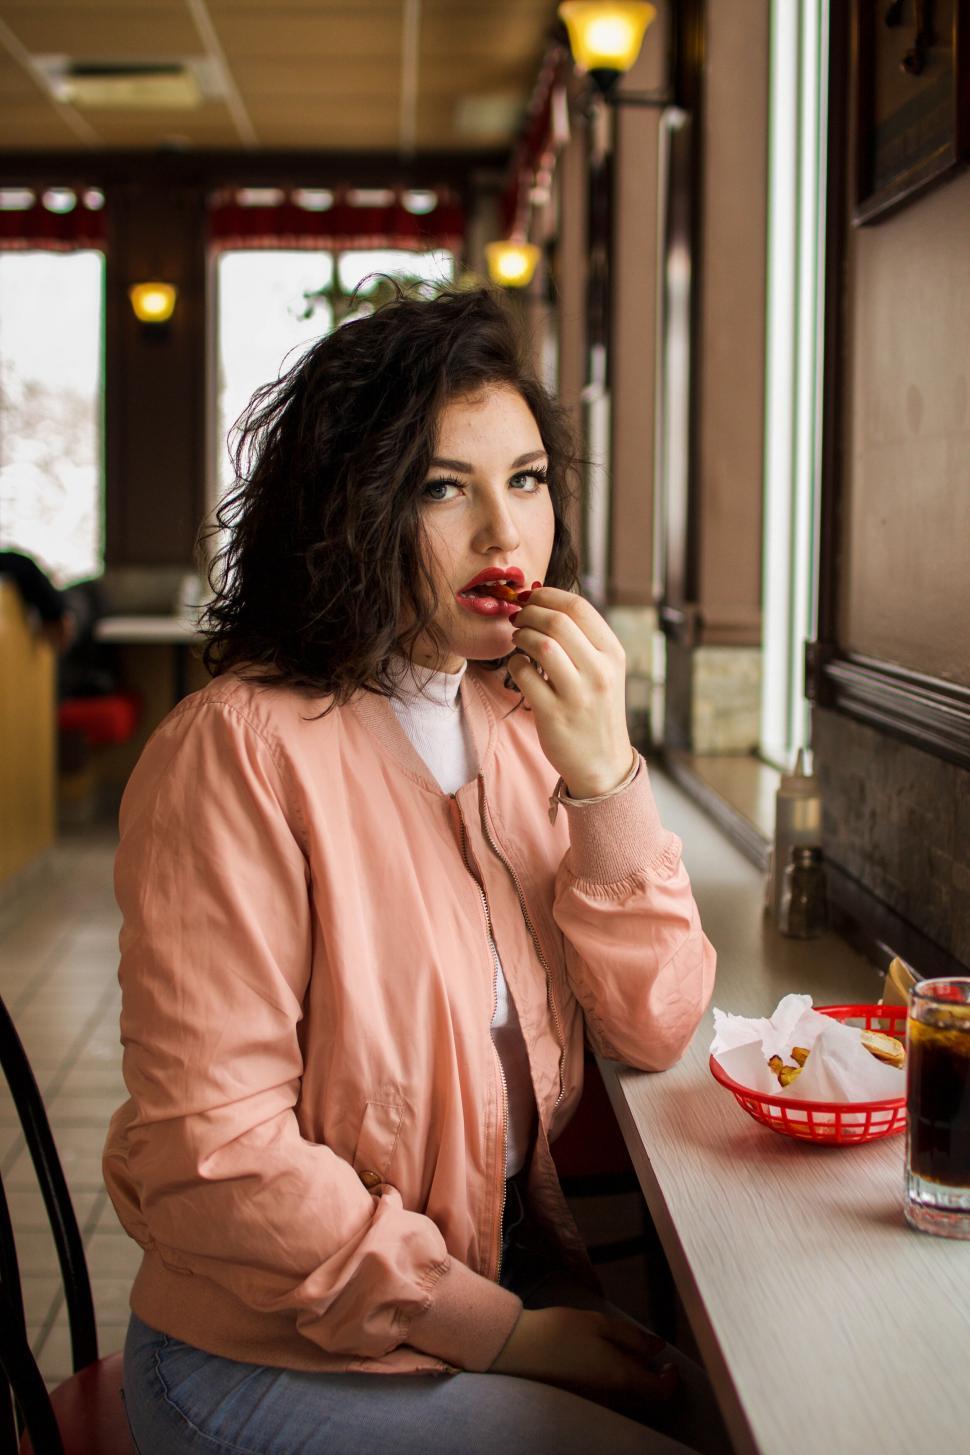 Free Image of Woman eating in a vintage diner setting 